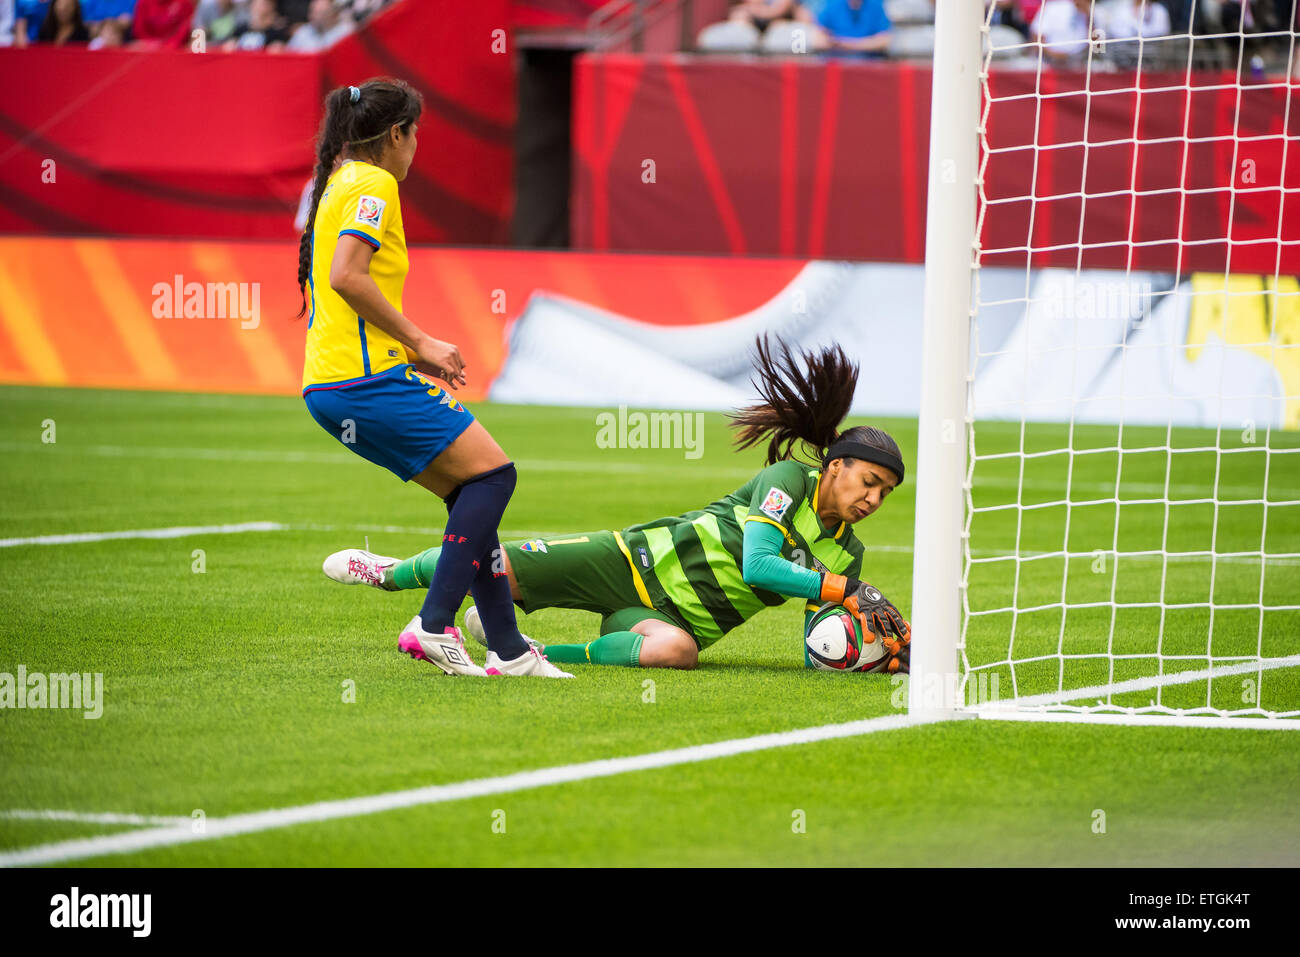 Vancouver, Canada - June 12, 2015: Ecuador goalkeeper Shirley BERRUZ (#1) makes a save during the opening round match between Switzerland and Ecuador of the FIFA Women's World Cup Canada 2015 at BC Place Stadium. Switzerland won the match 10-1. Stock Photo